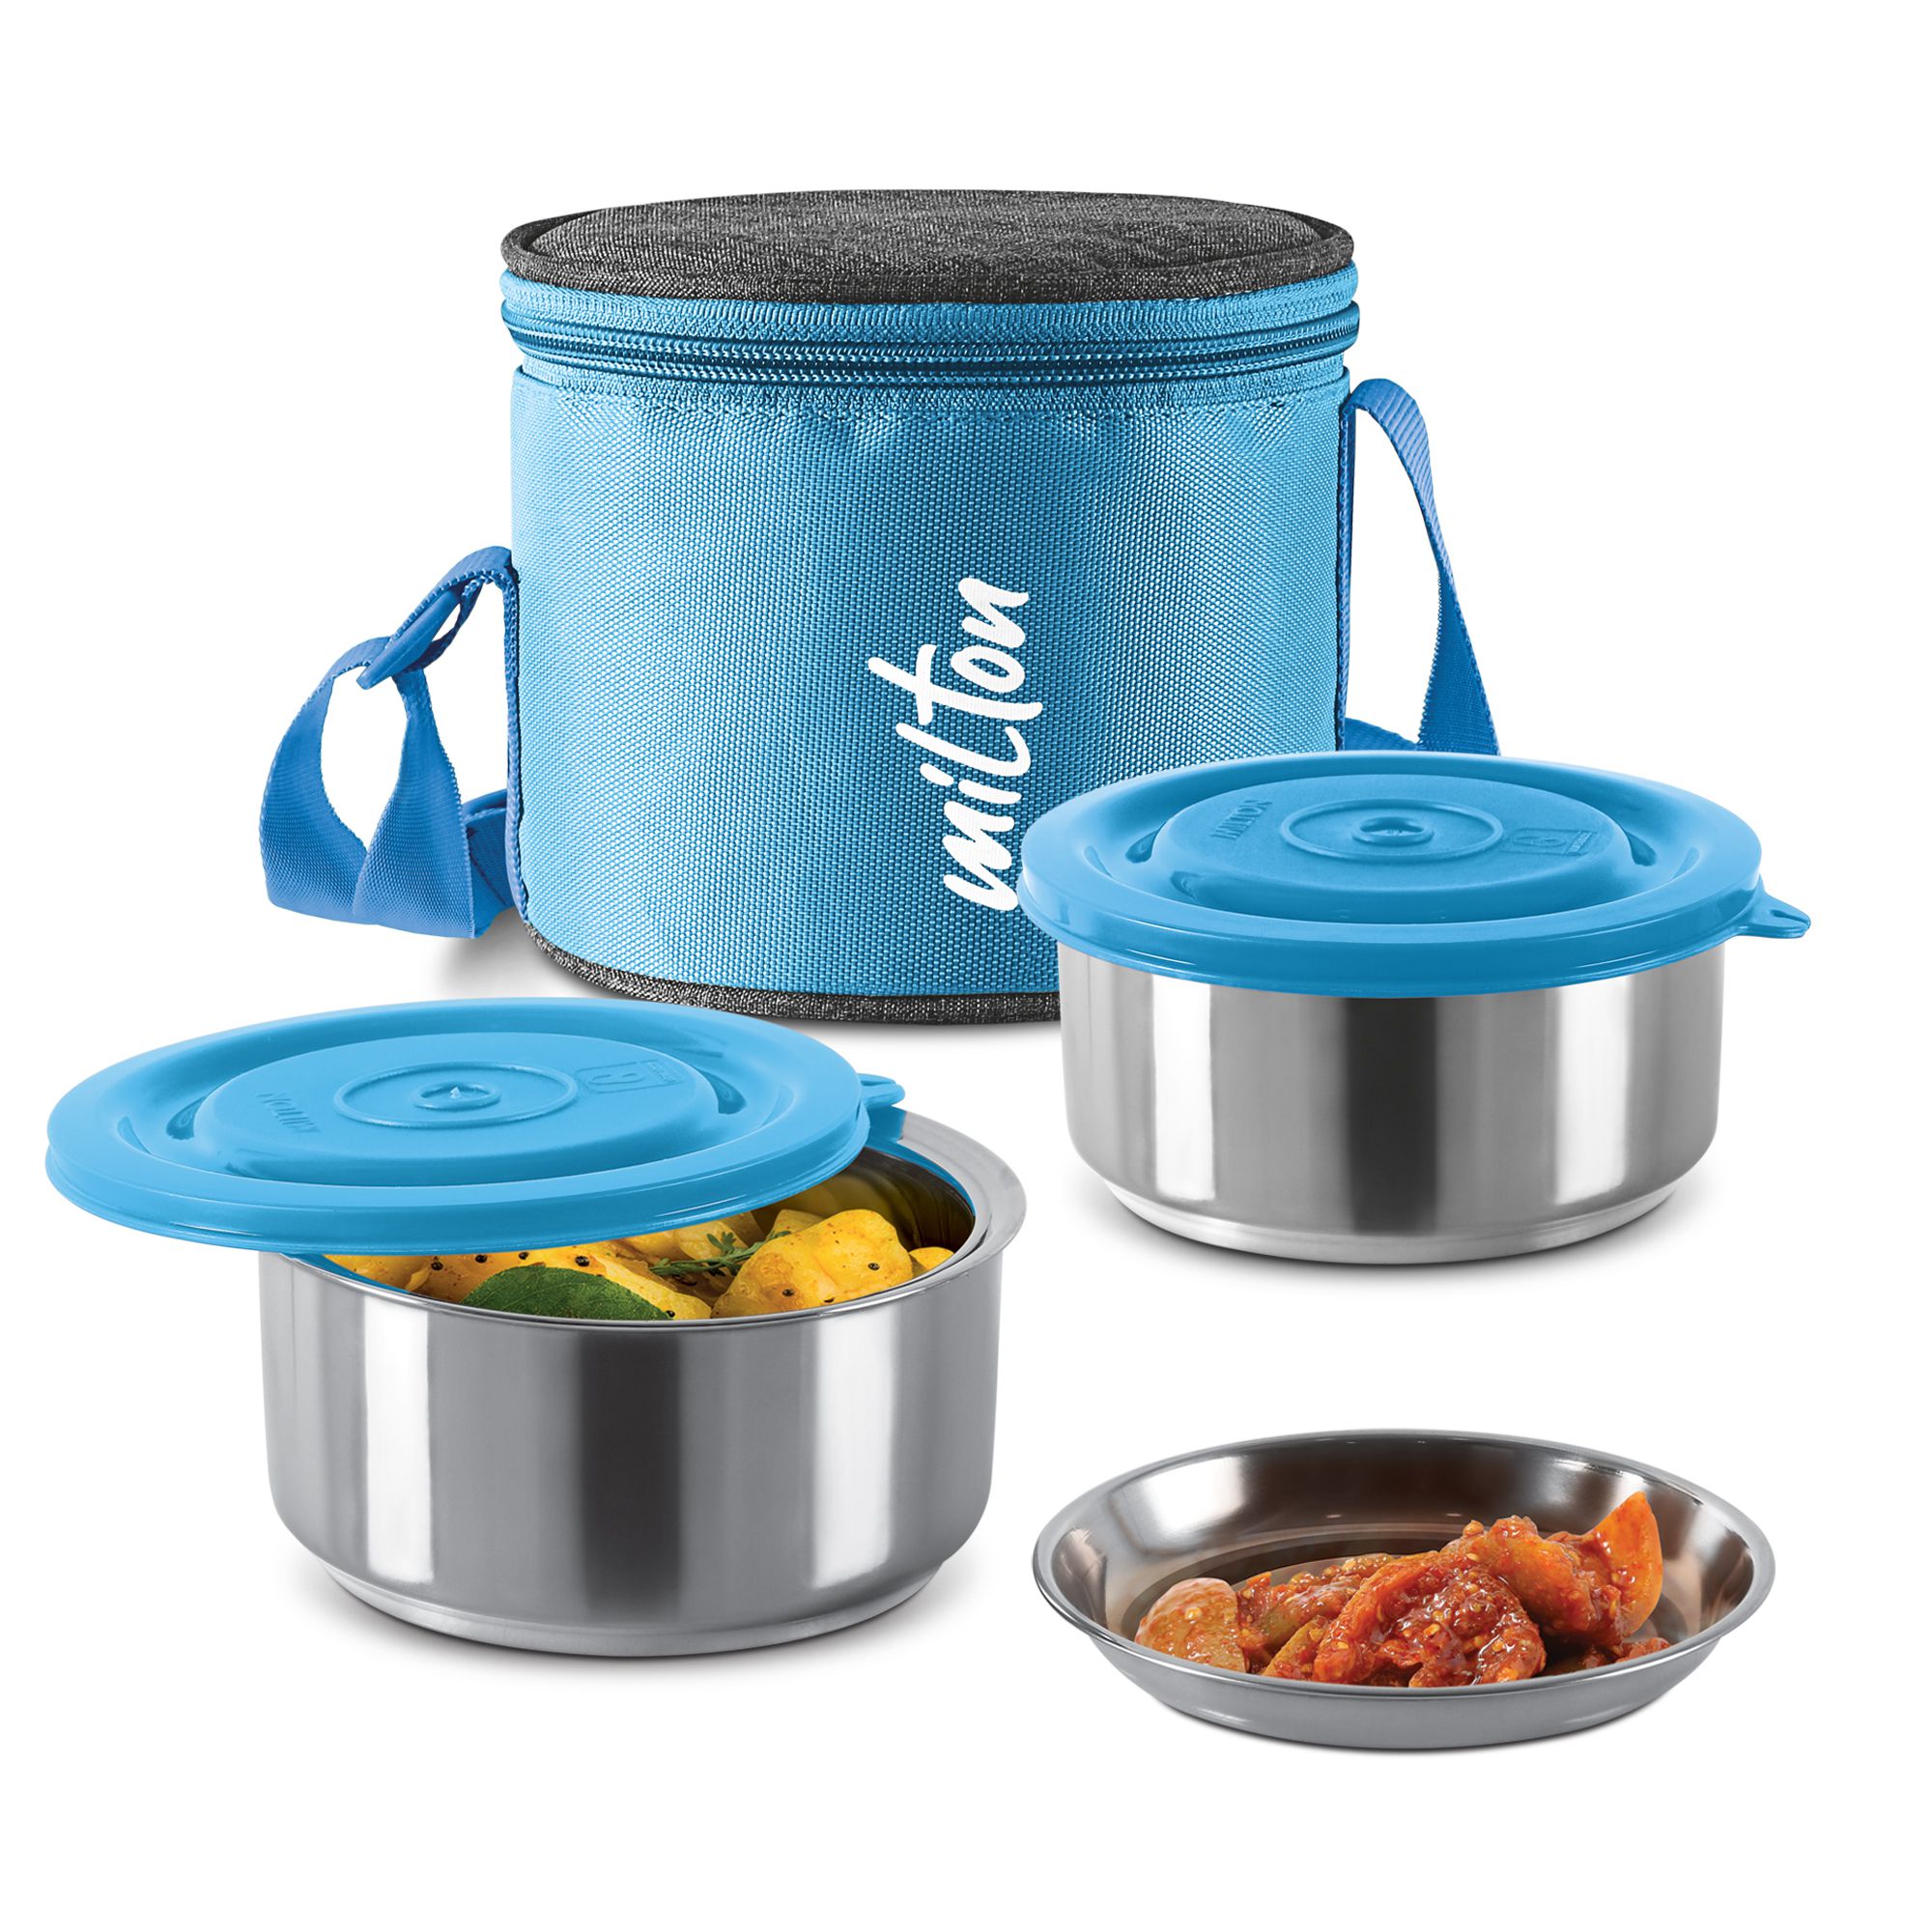     			Milton Ambition 2 Stainless Steel Tiffin, 2 Containers (300 ml Each with Jacket) Blue